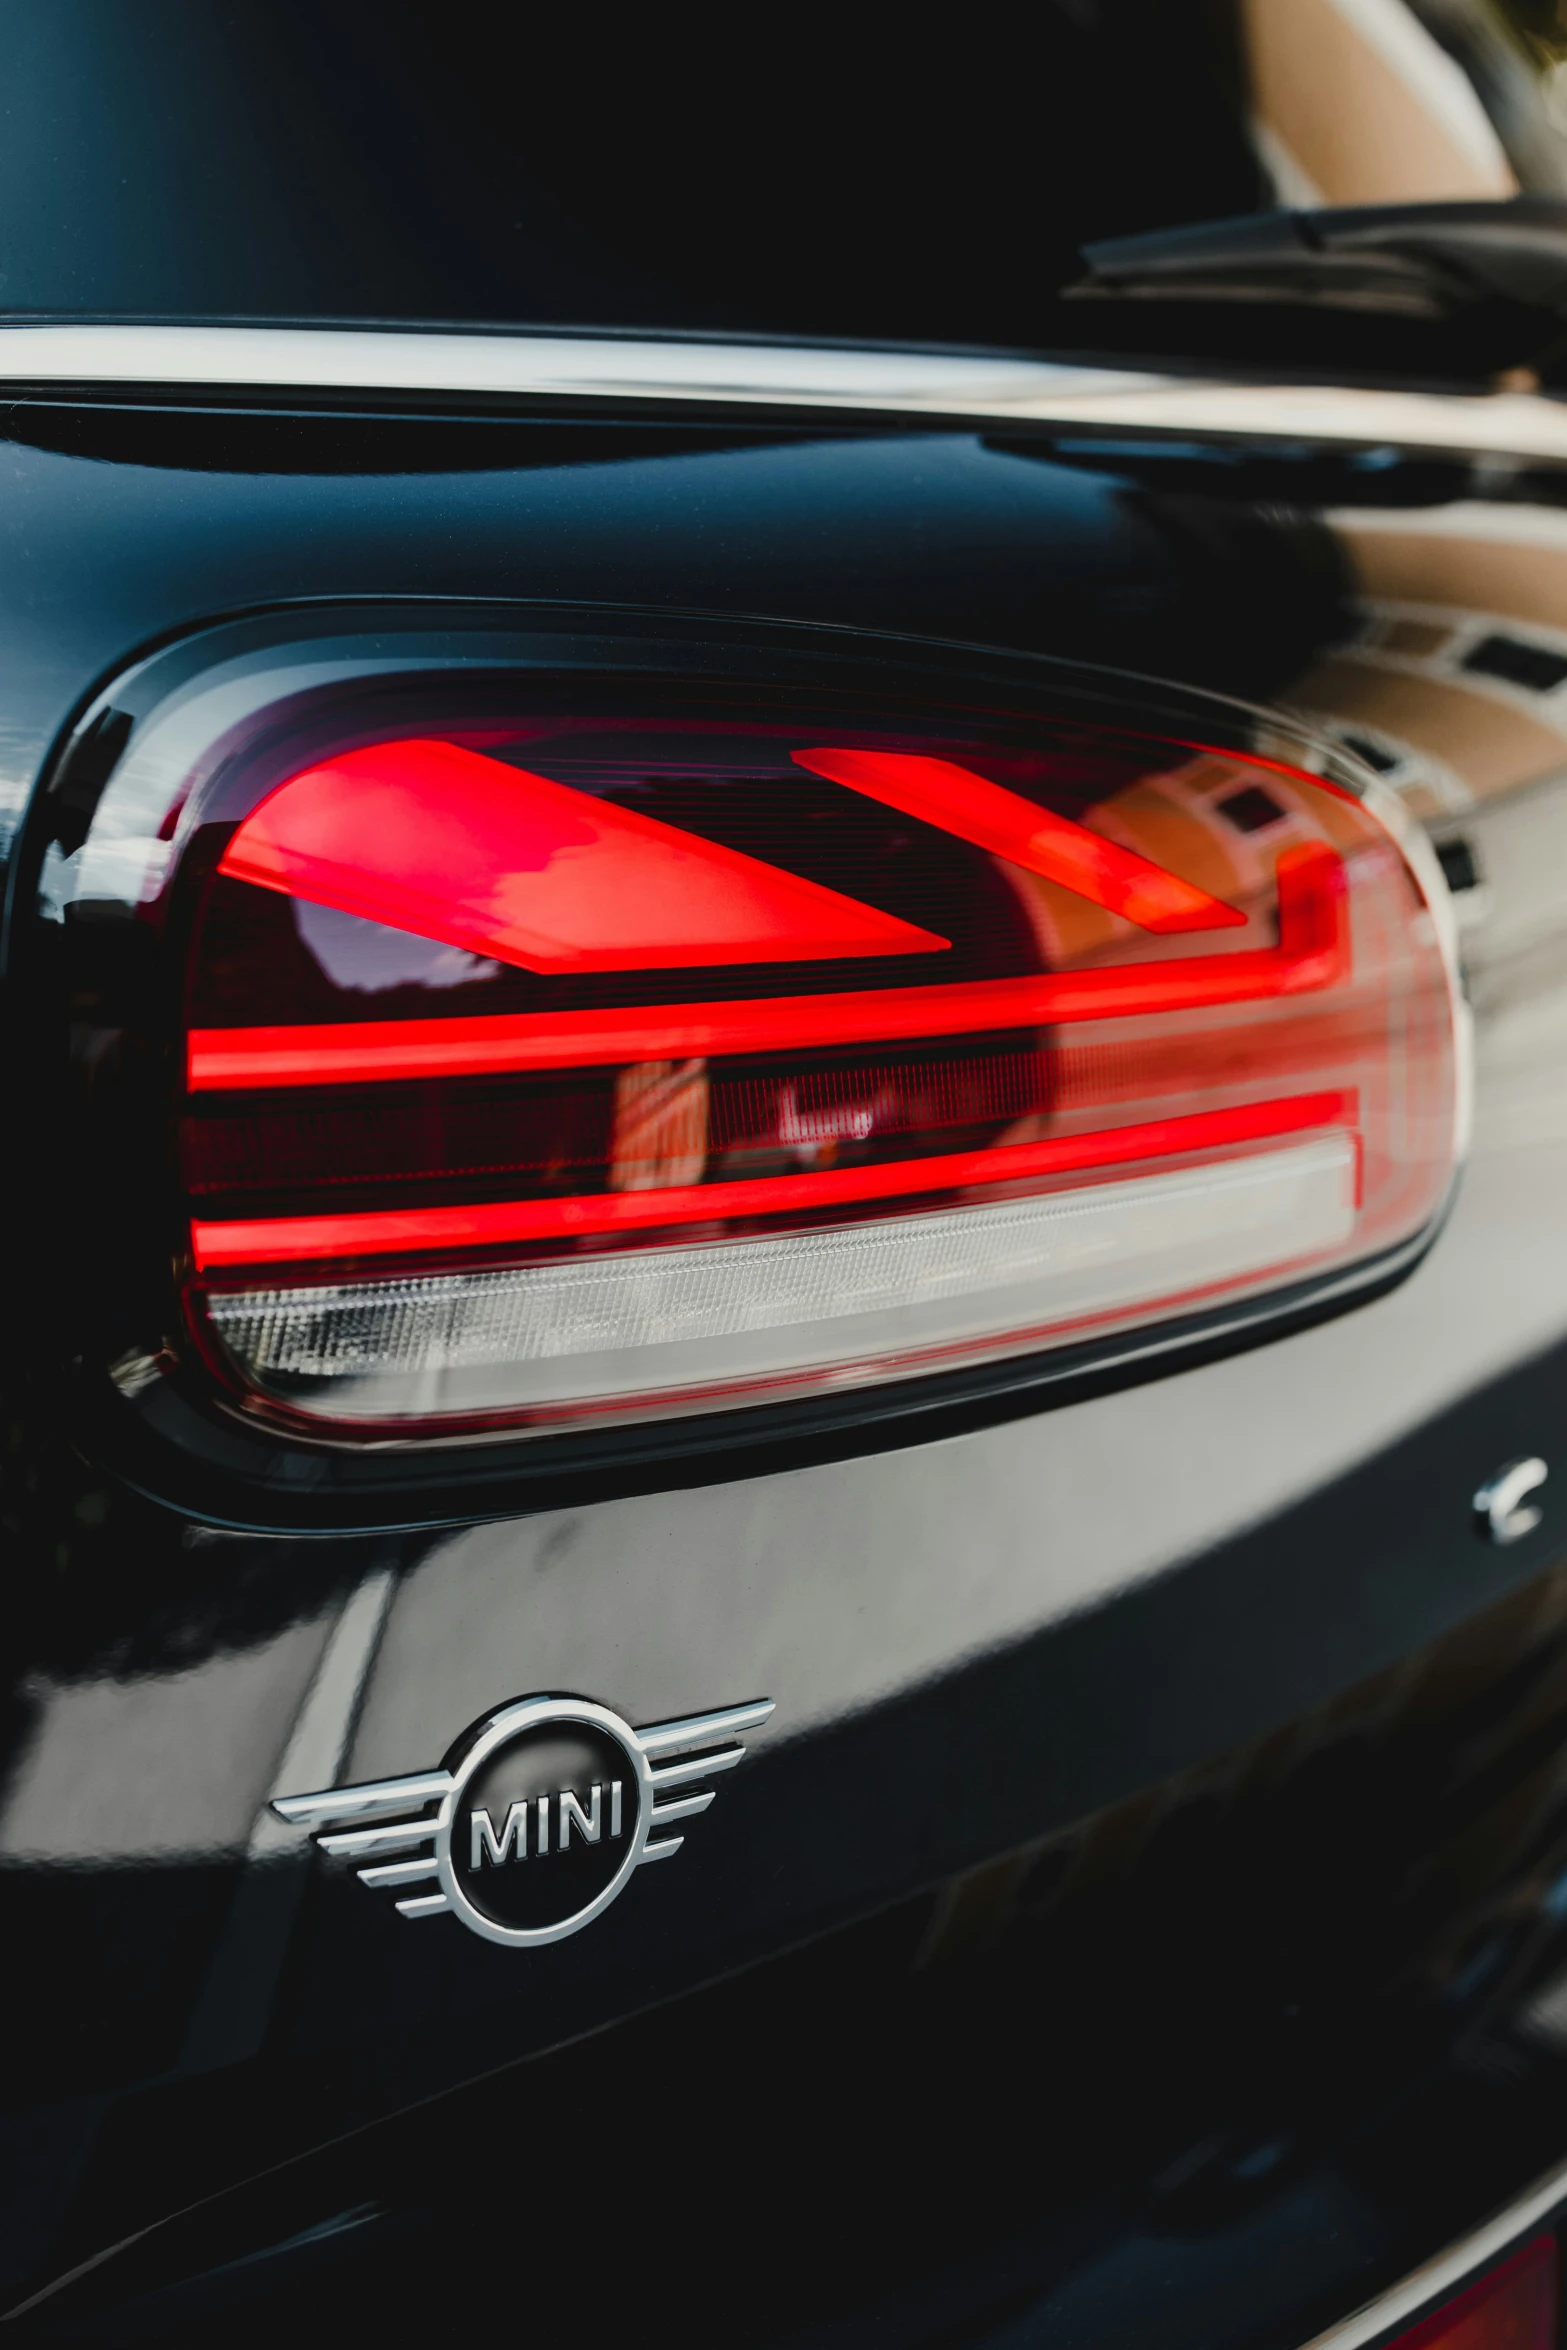 a close - up po of the tail lights of a vehicle